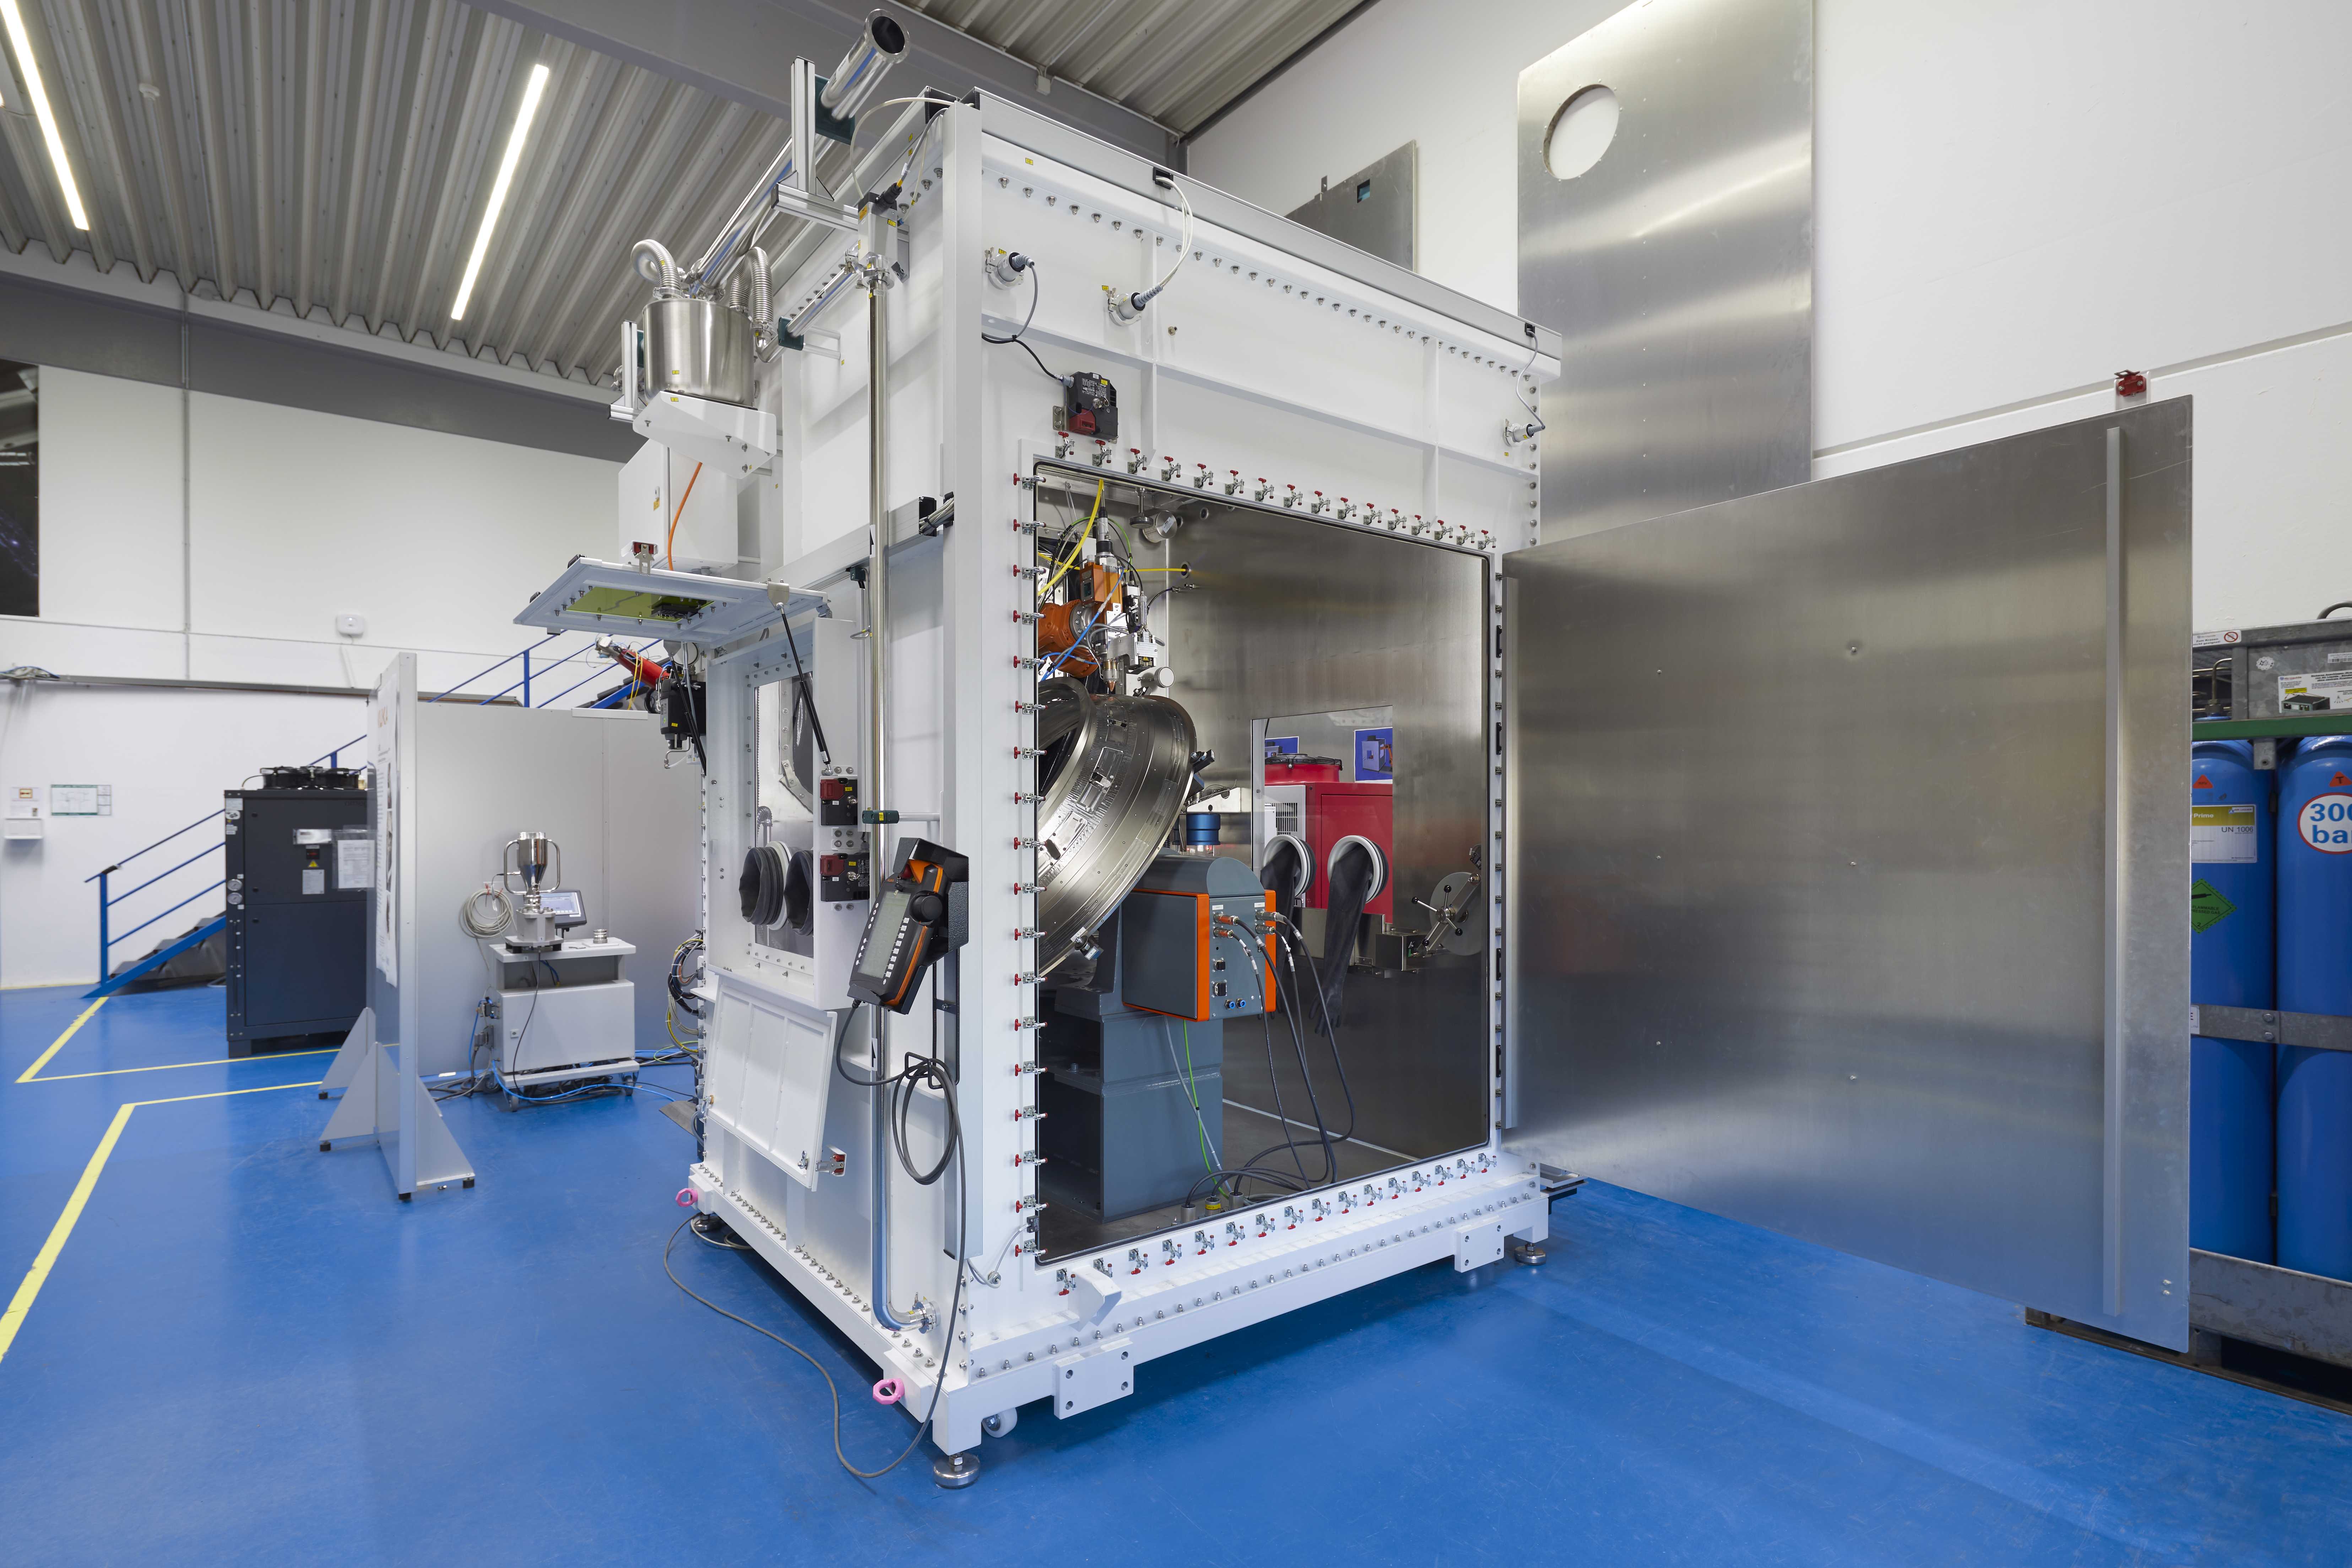 System for Laser Material Deposition with robot support and protective gas cell for aerospace applications, at ProLMD project partner KUKA in Würselen/Germany.